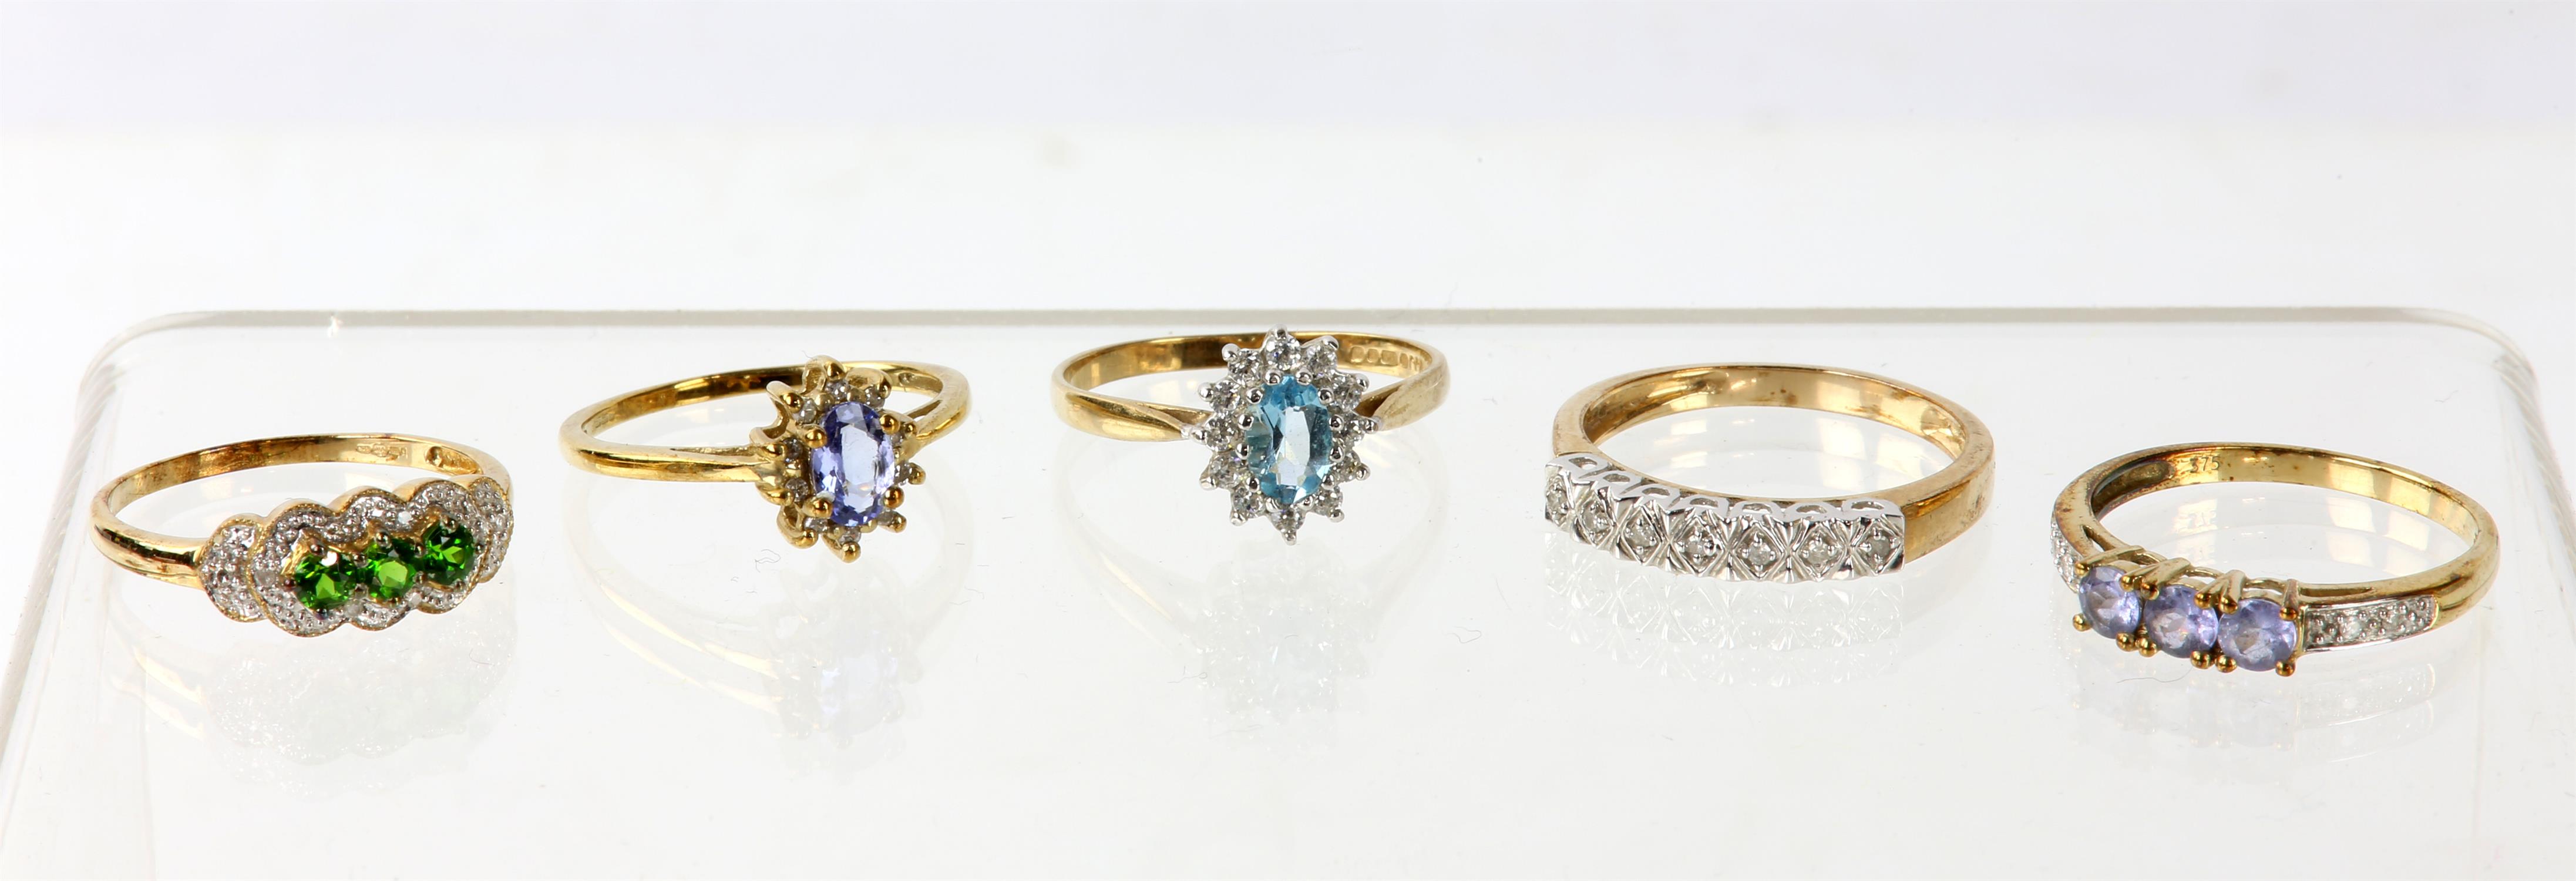 Five dress rings, including a blue topaz cluster ring set with an oval blue topaz and a surround of